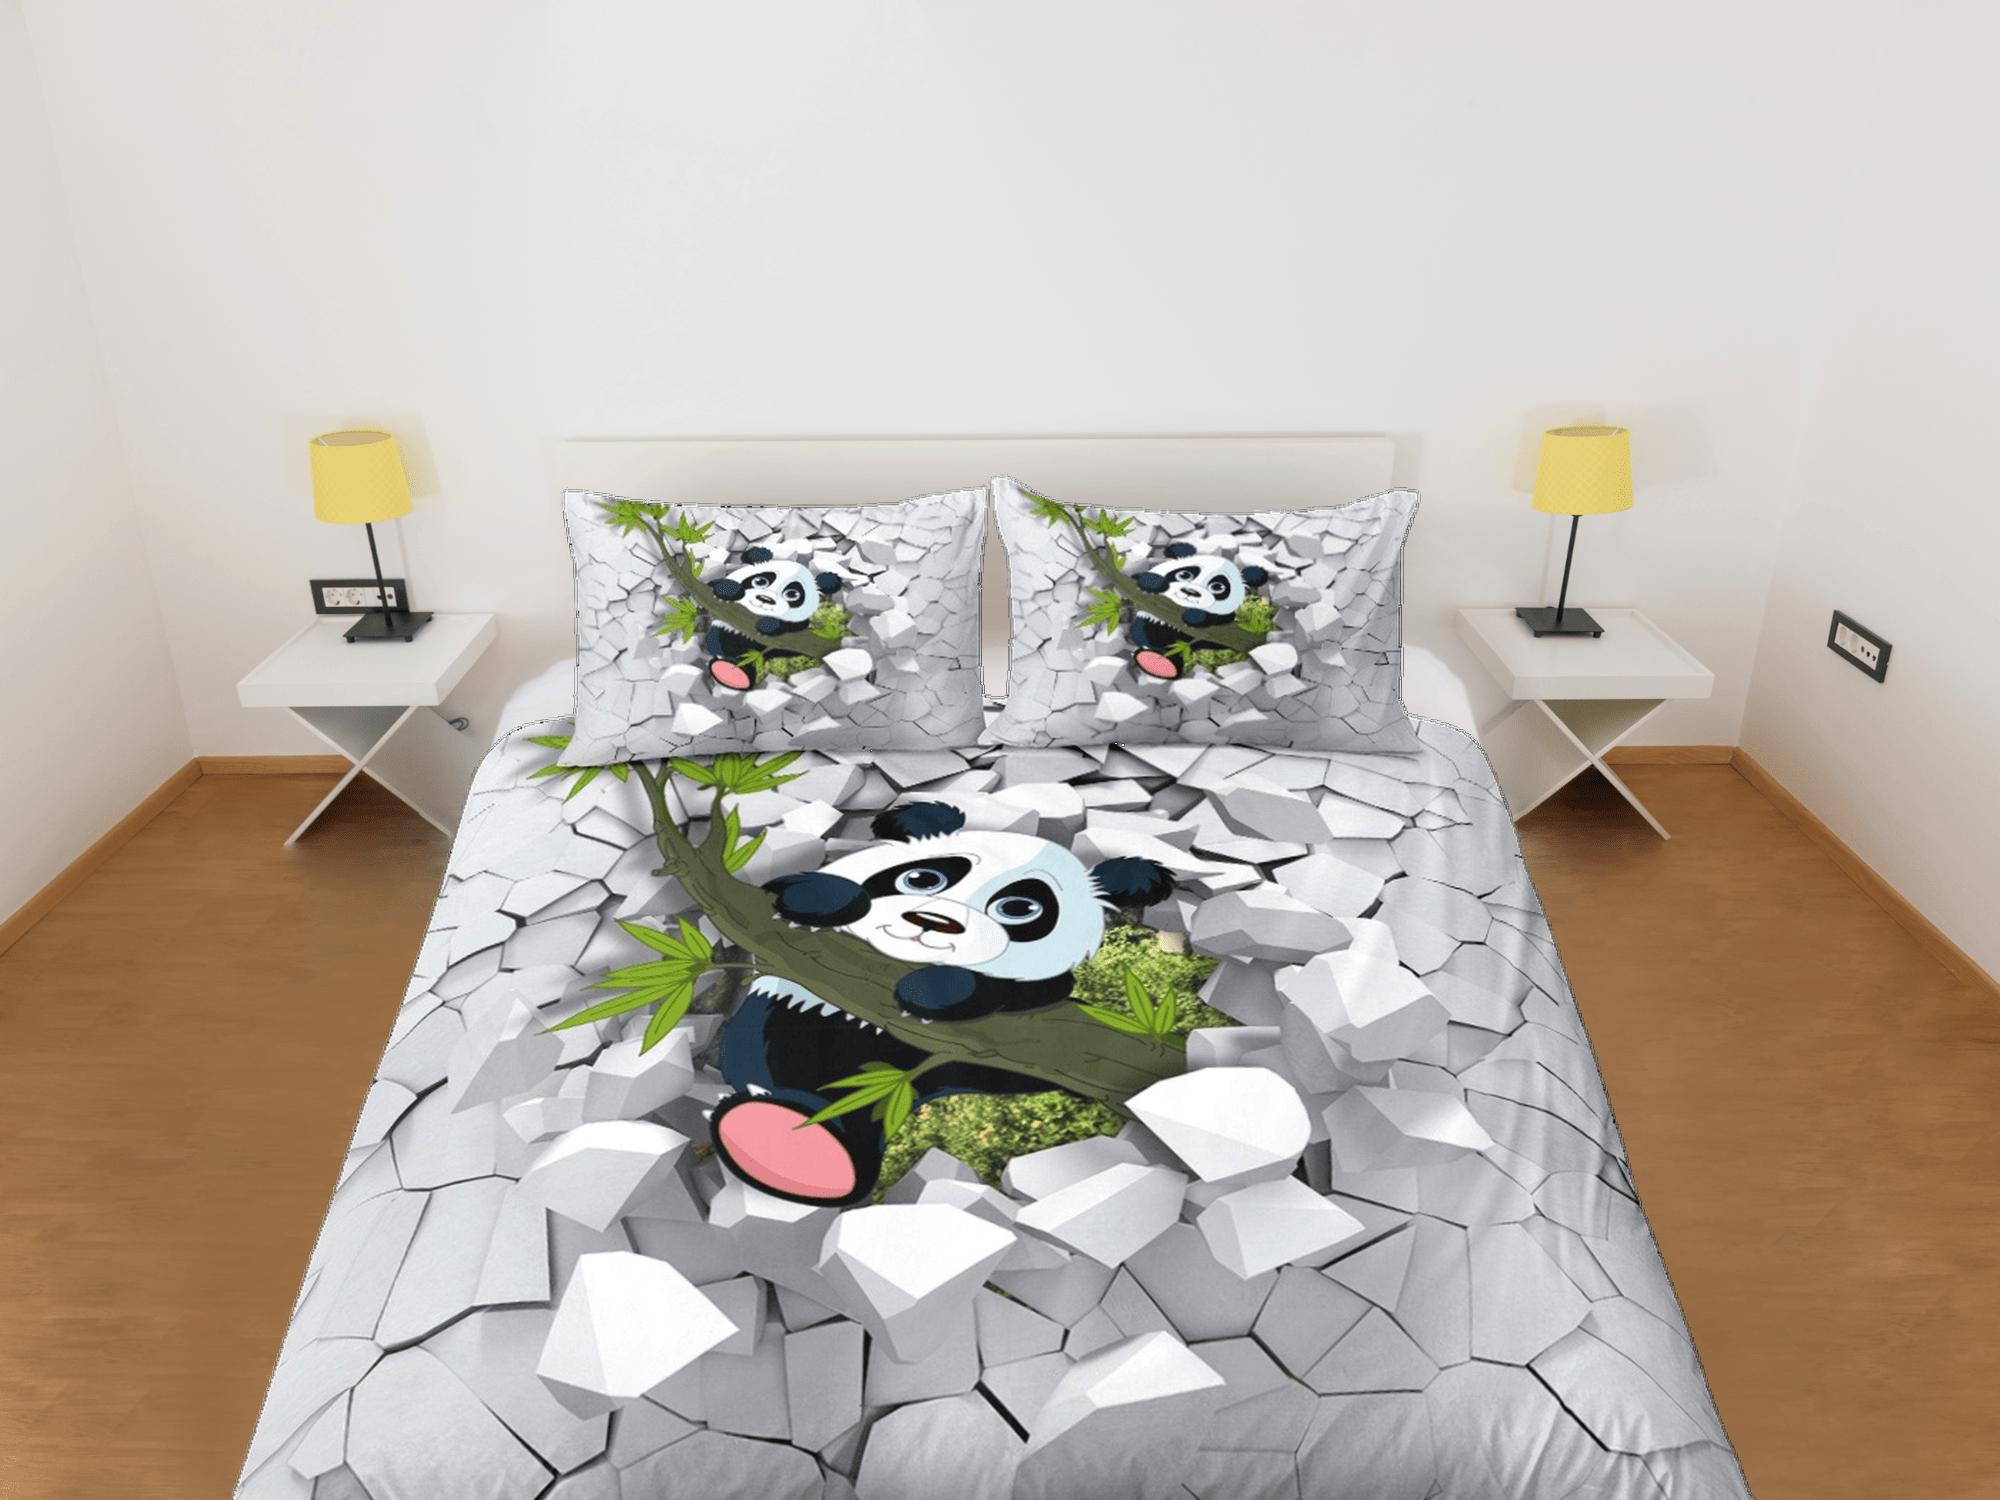 daintyduvet Cute Panda in Bamboo Duvet Cover Set Colorful Bedspread, Kids Full Bedding Set with Pillowcase, Comforter Cover Twin